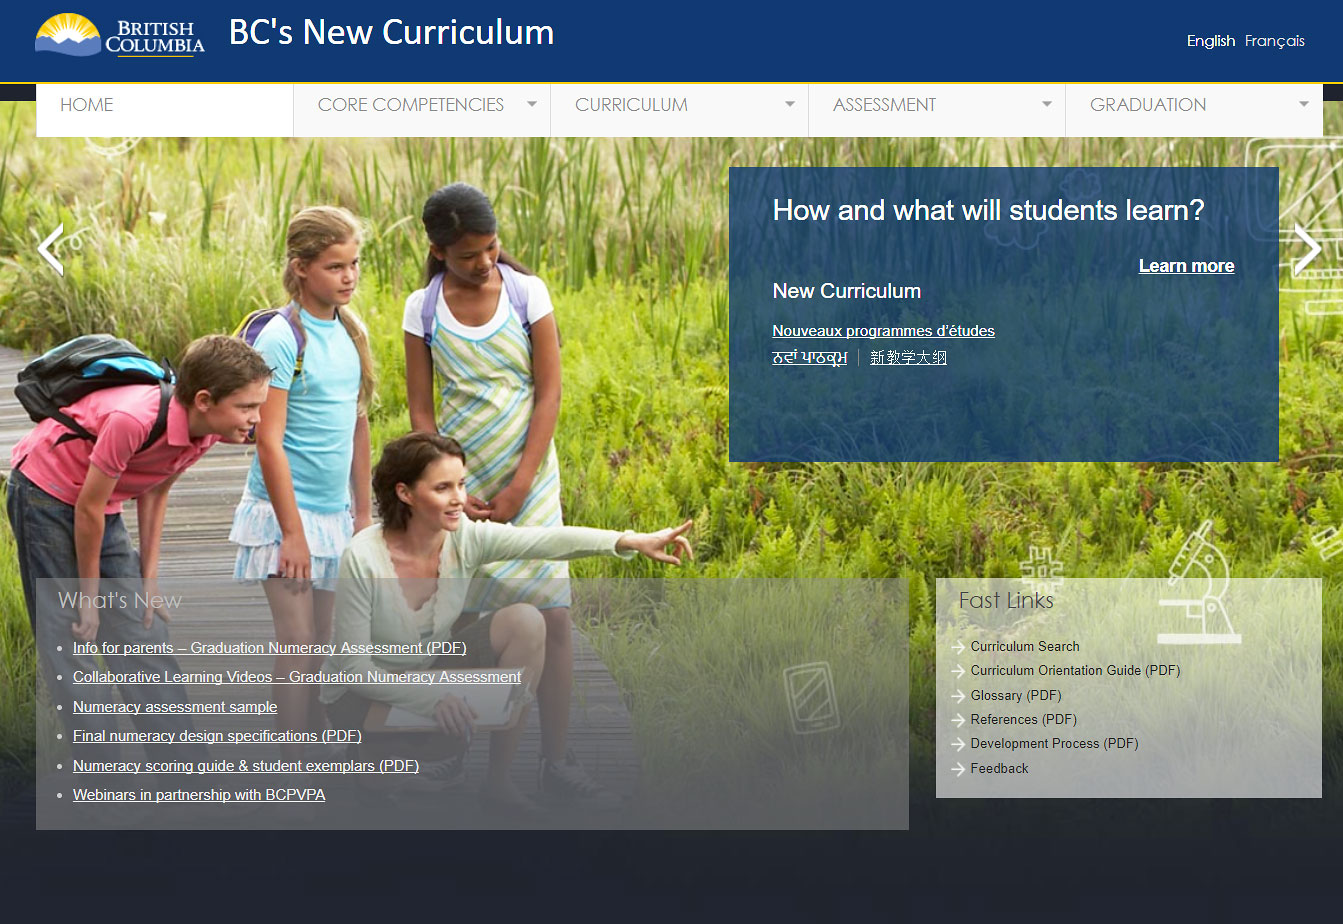 Opportunities for Post-Secondary Education: Responding to British Columbia’s New K-12 Curriculum